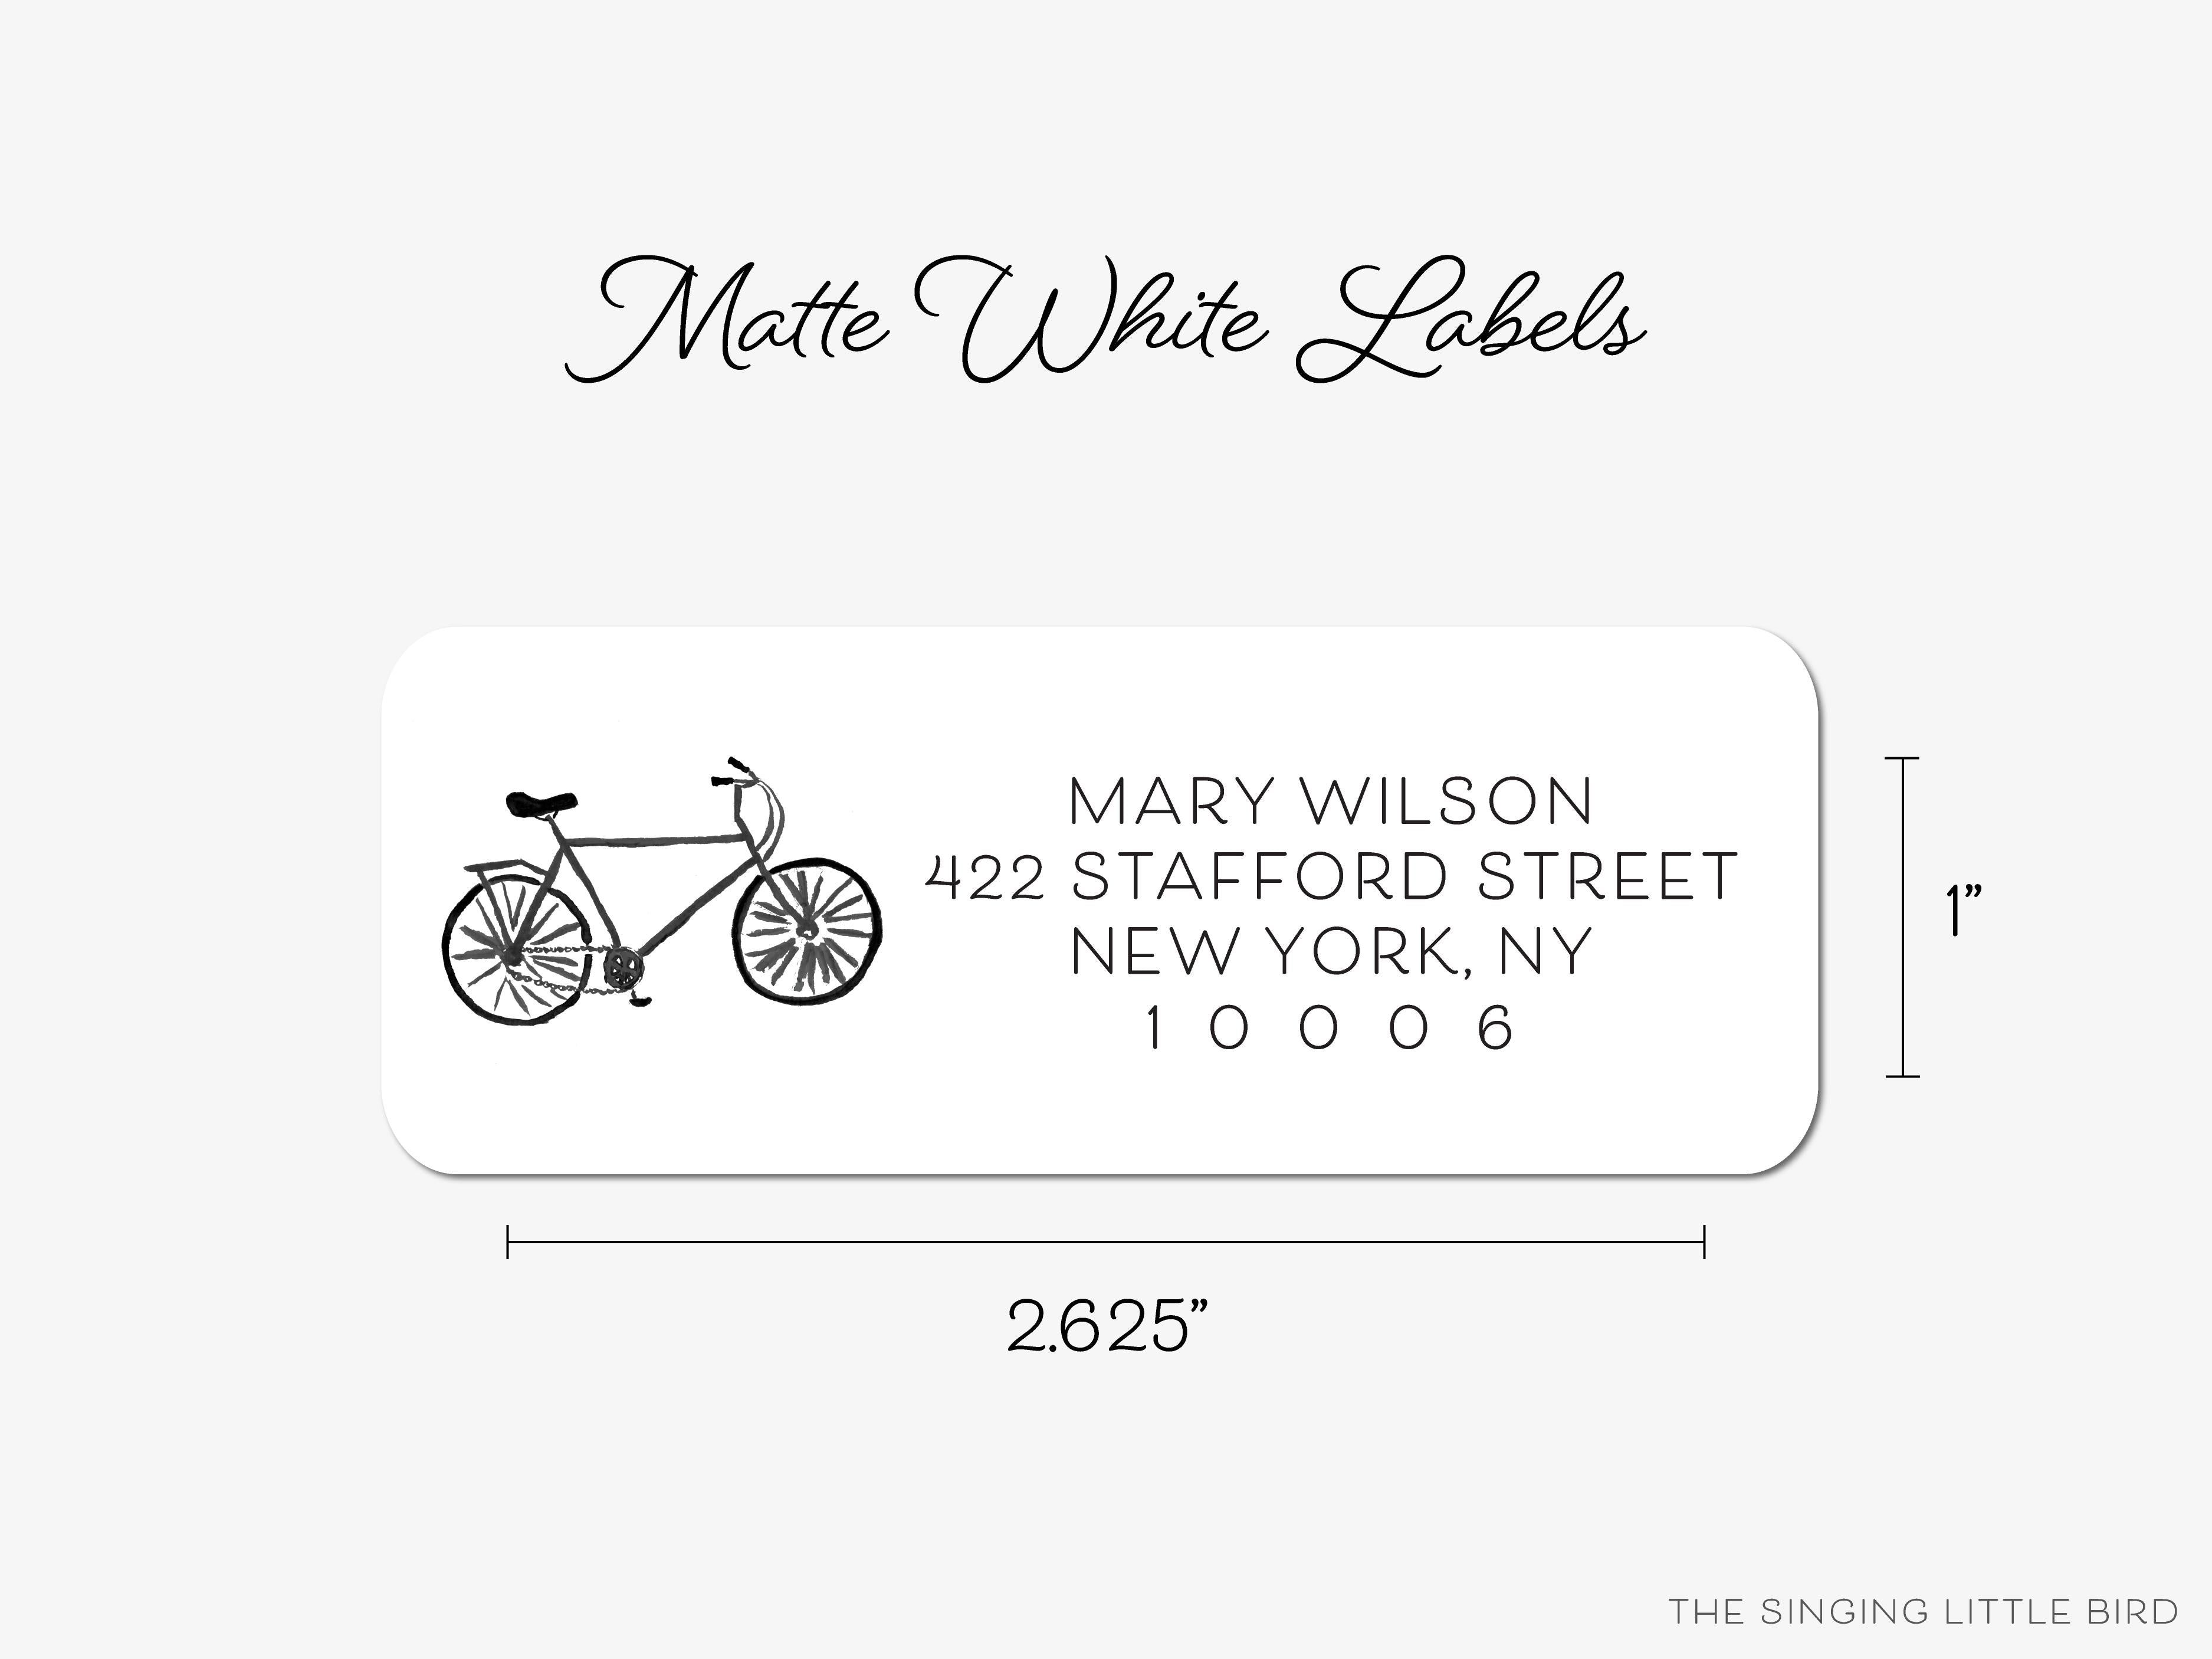 Black Bicycle Return Address Labels-These personalized return address labels are 2.625" x 1" and feature our hand-painted watercolor bicycle, printed in the USA on beautiful matte finish labels. These make great gifts for yourself or the bike lover.-The Singing Little Bird